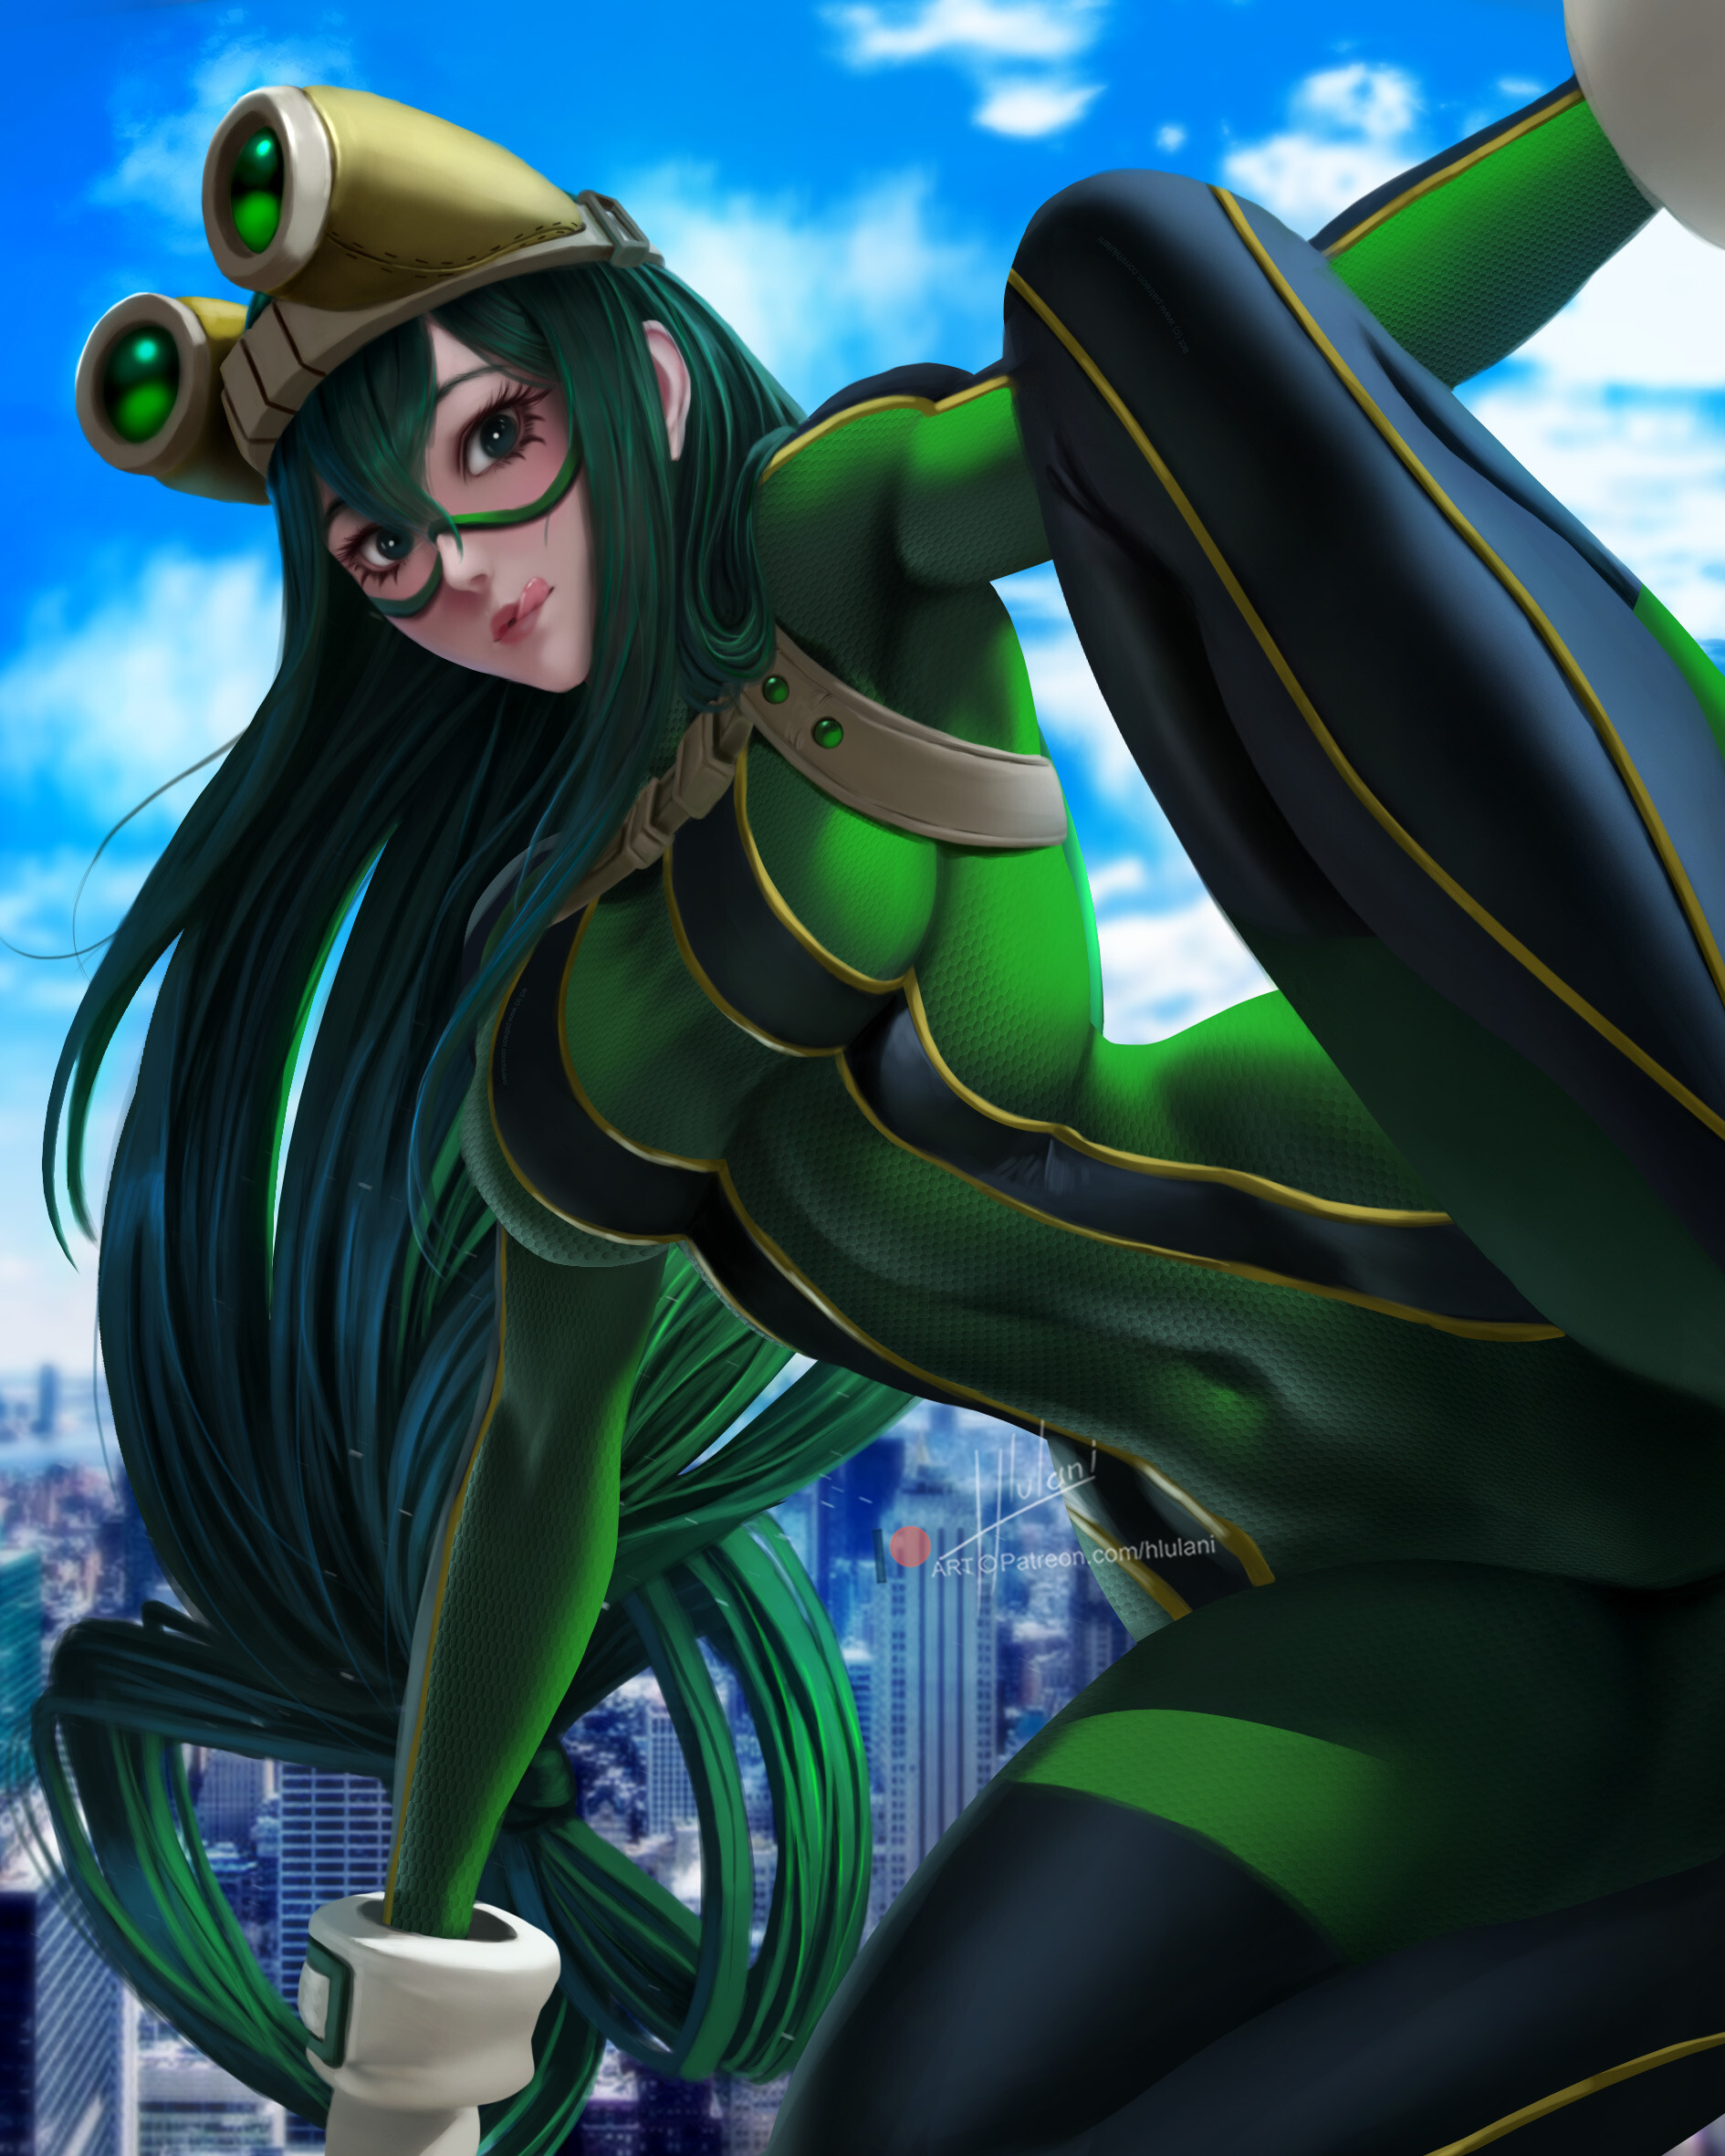 Another take on BNHA's Tsu (Froppy). 